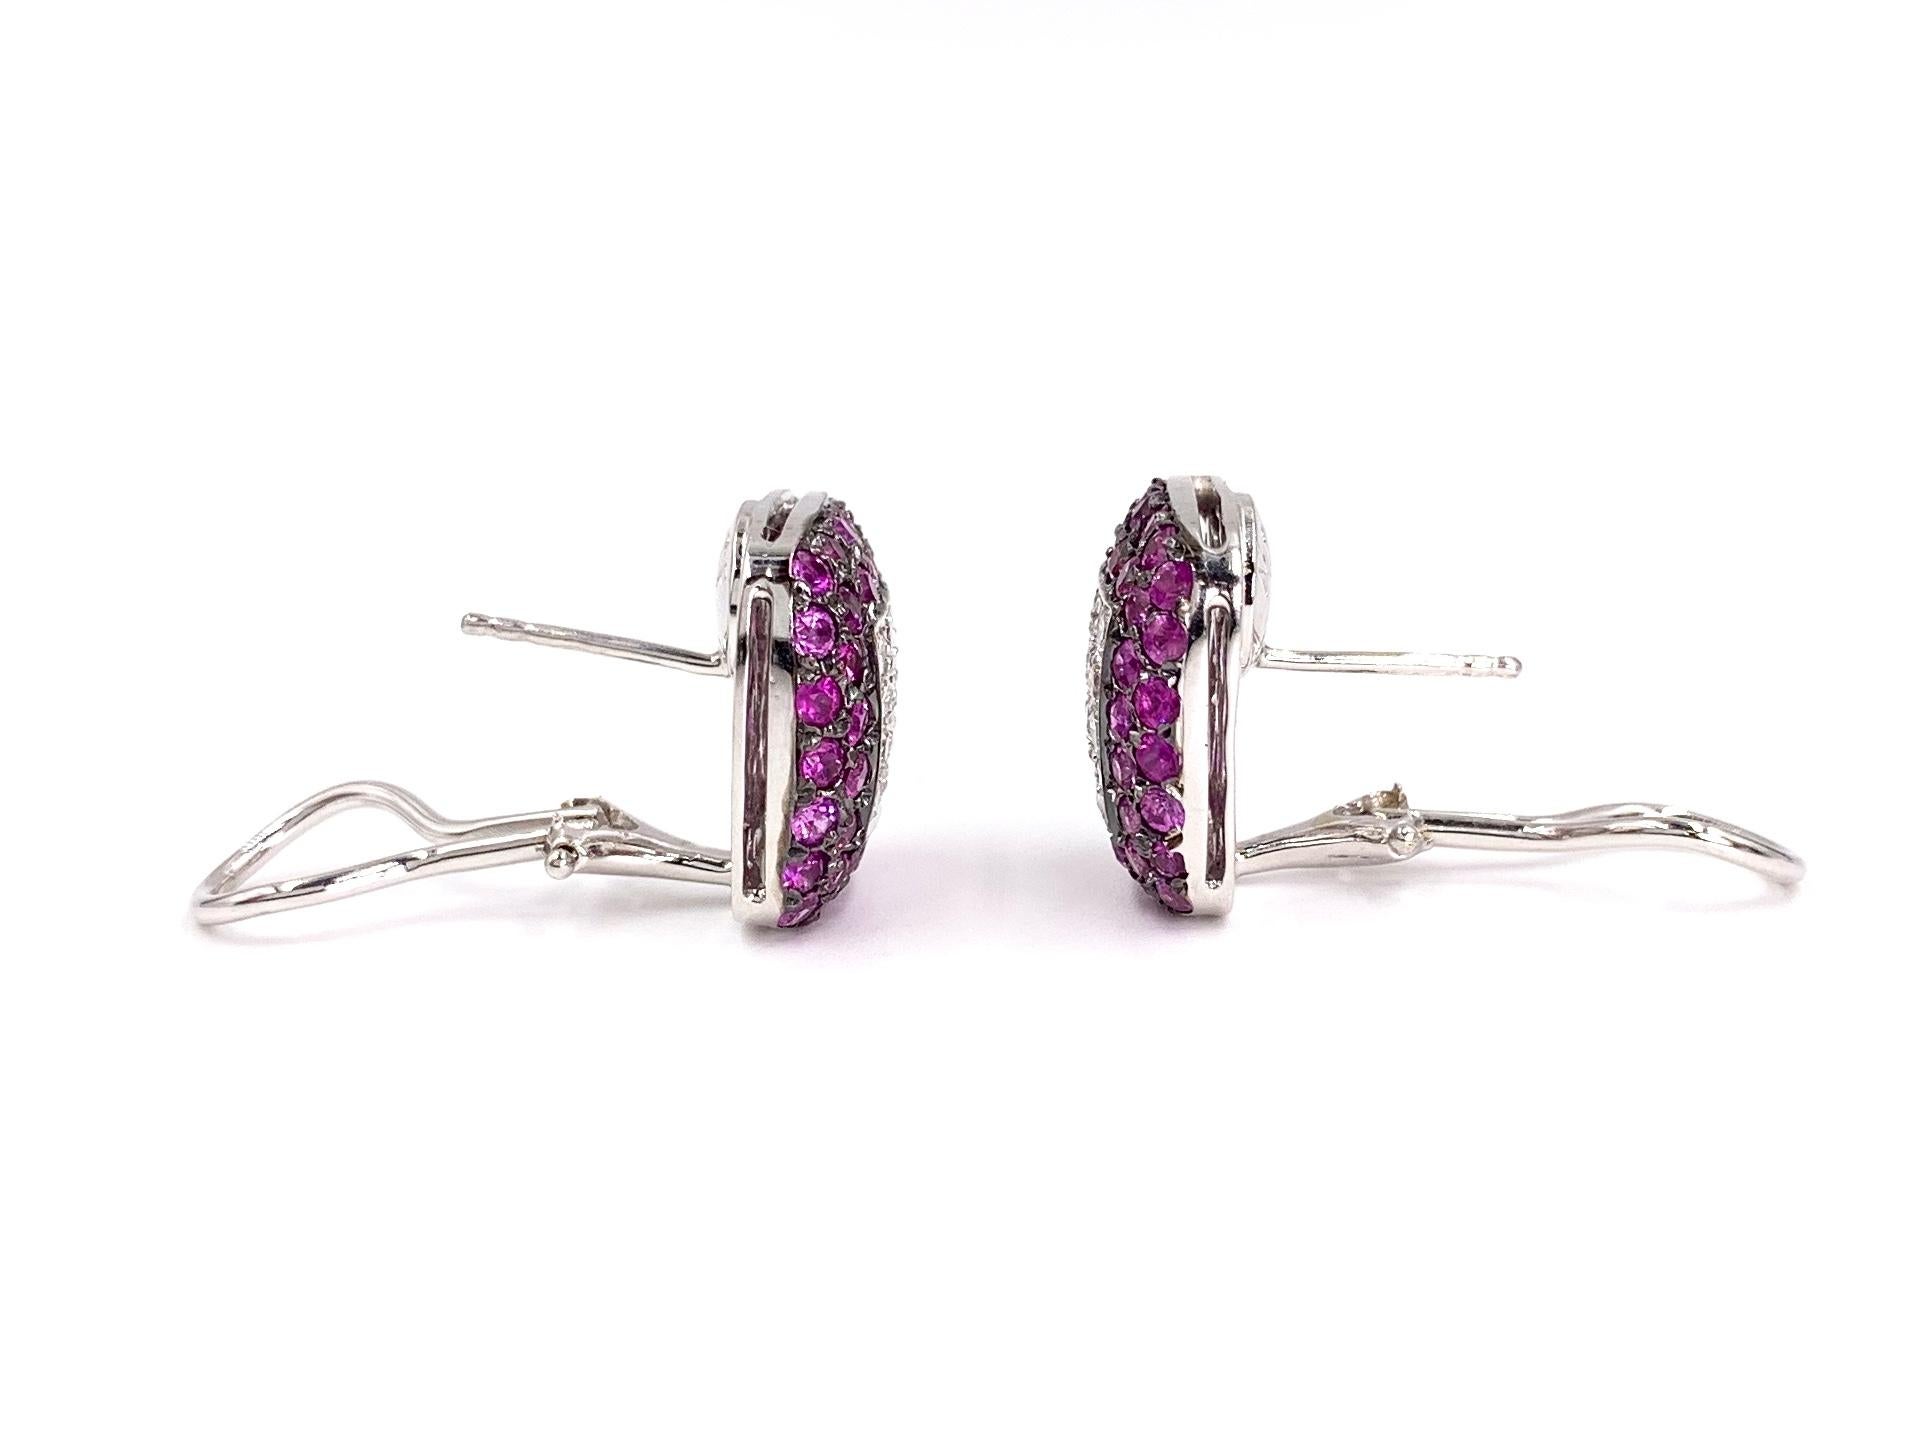 Contemporary 18 Karat White Gold Diamond and Pink Sapphire Earrings For Sale